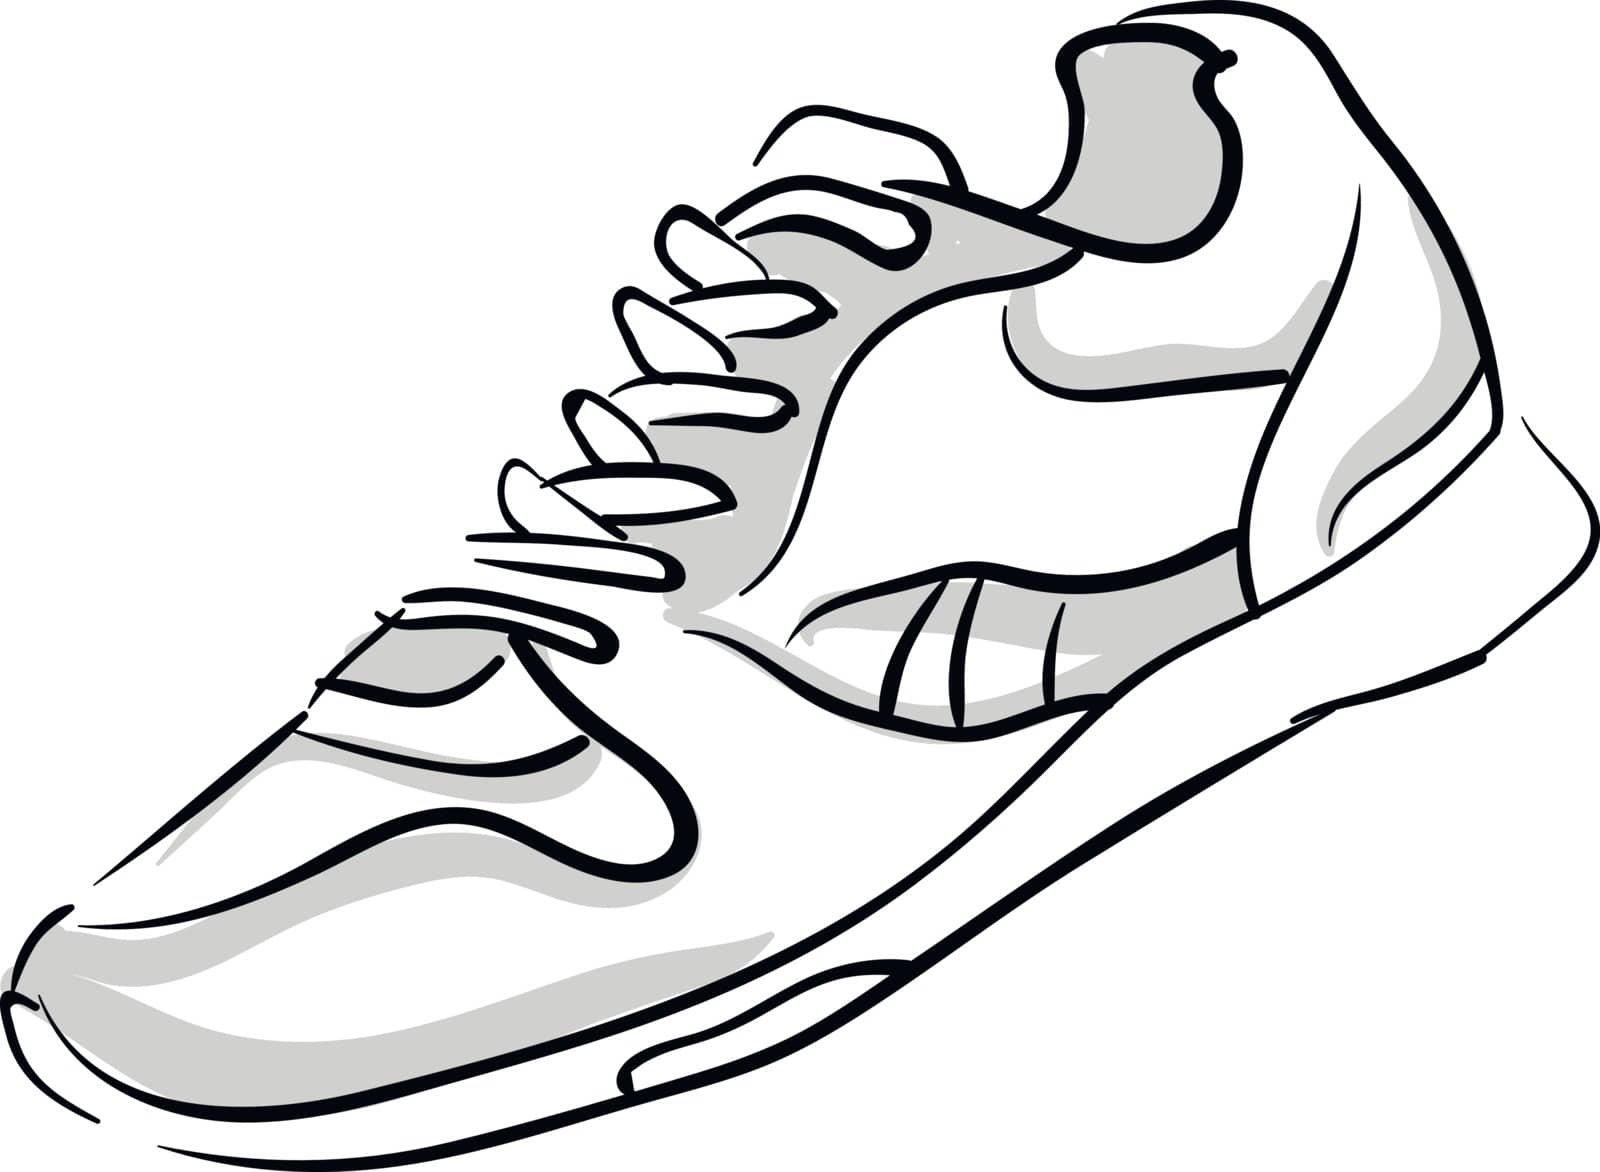 A single shoe in grey and white colors with white laces tied over white background vector color drawing or illustration 